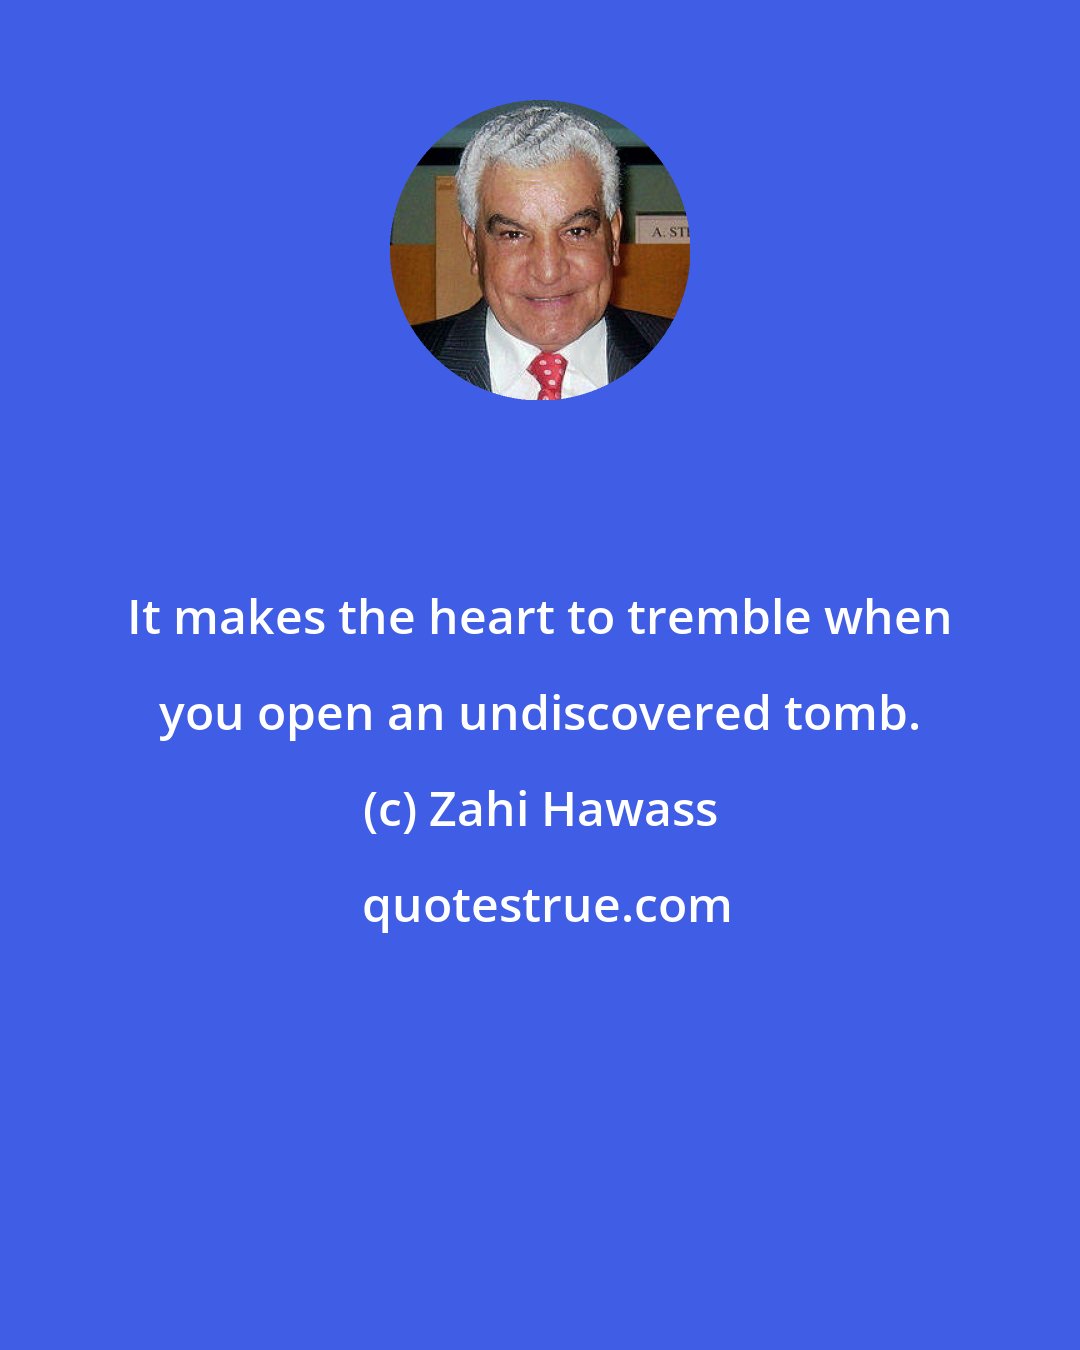 Zahi Hawass: It makes the heart to tremble when you open an undiscovered tomb.